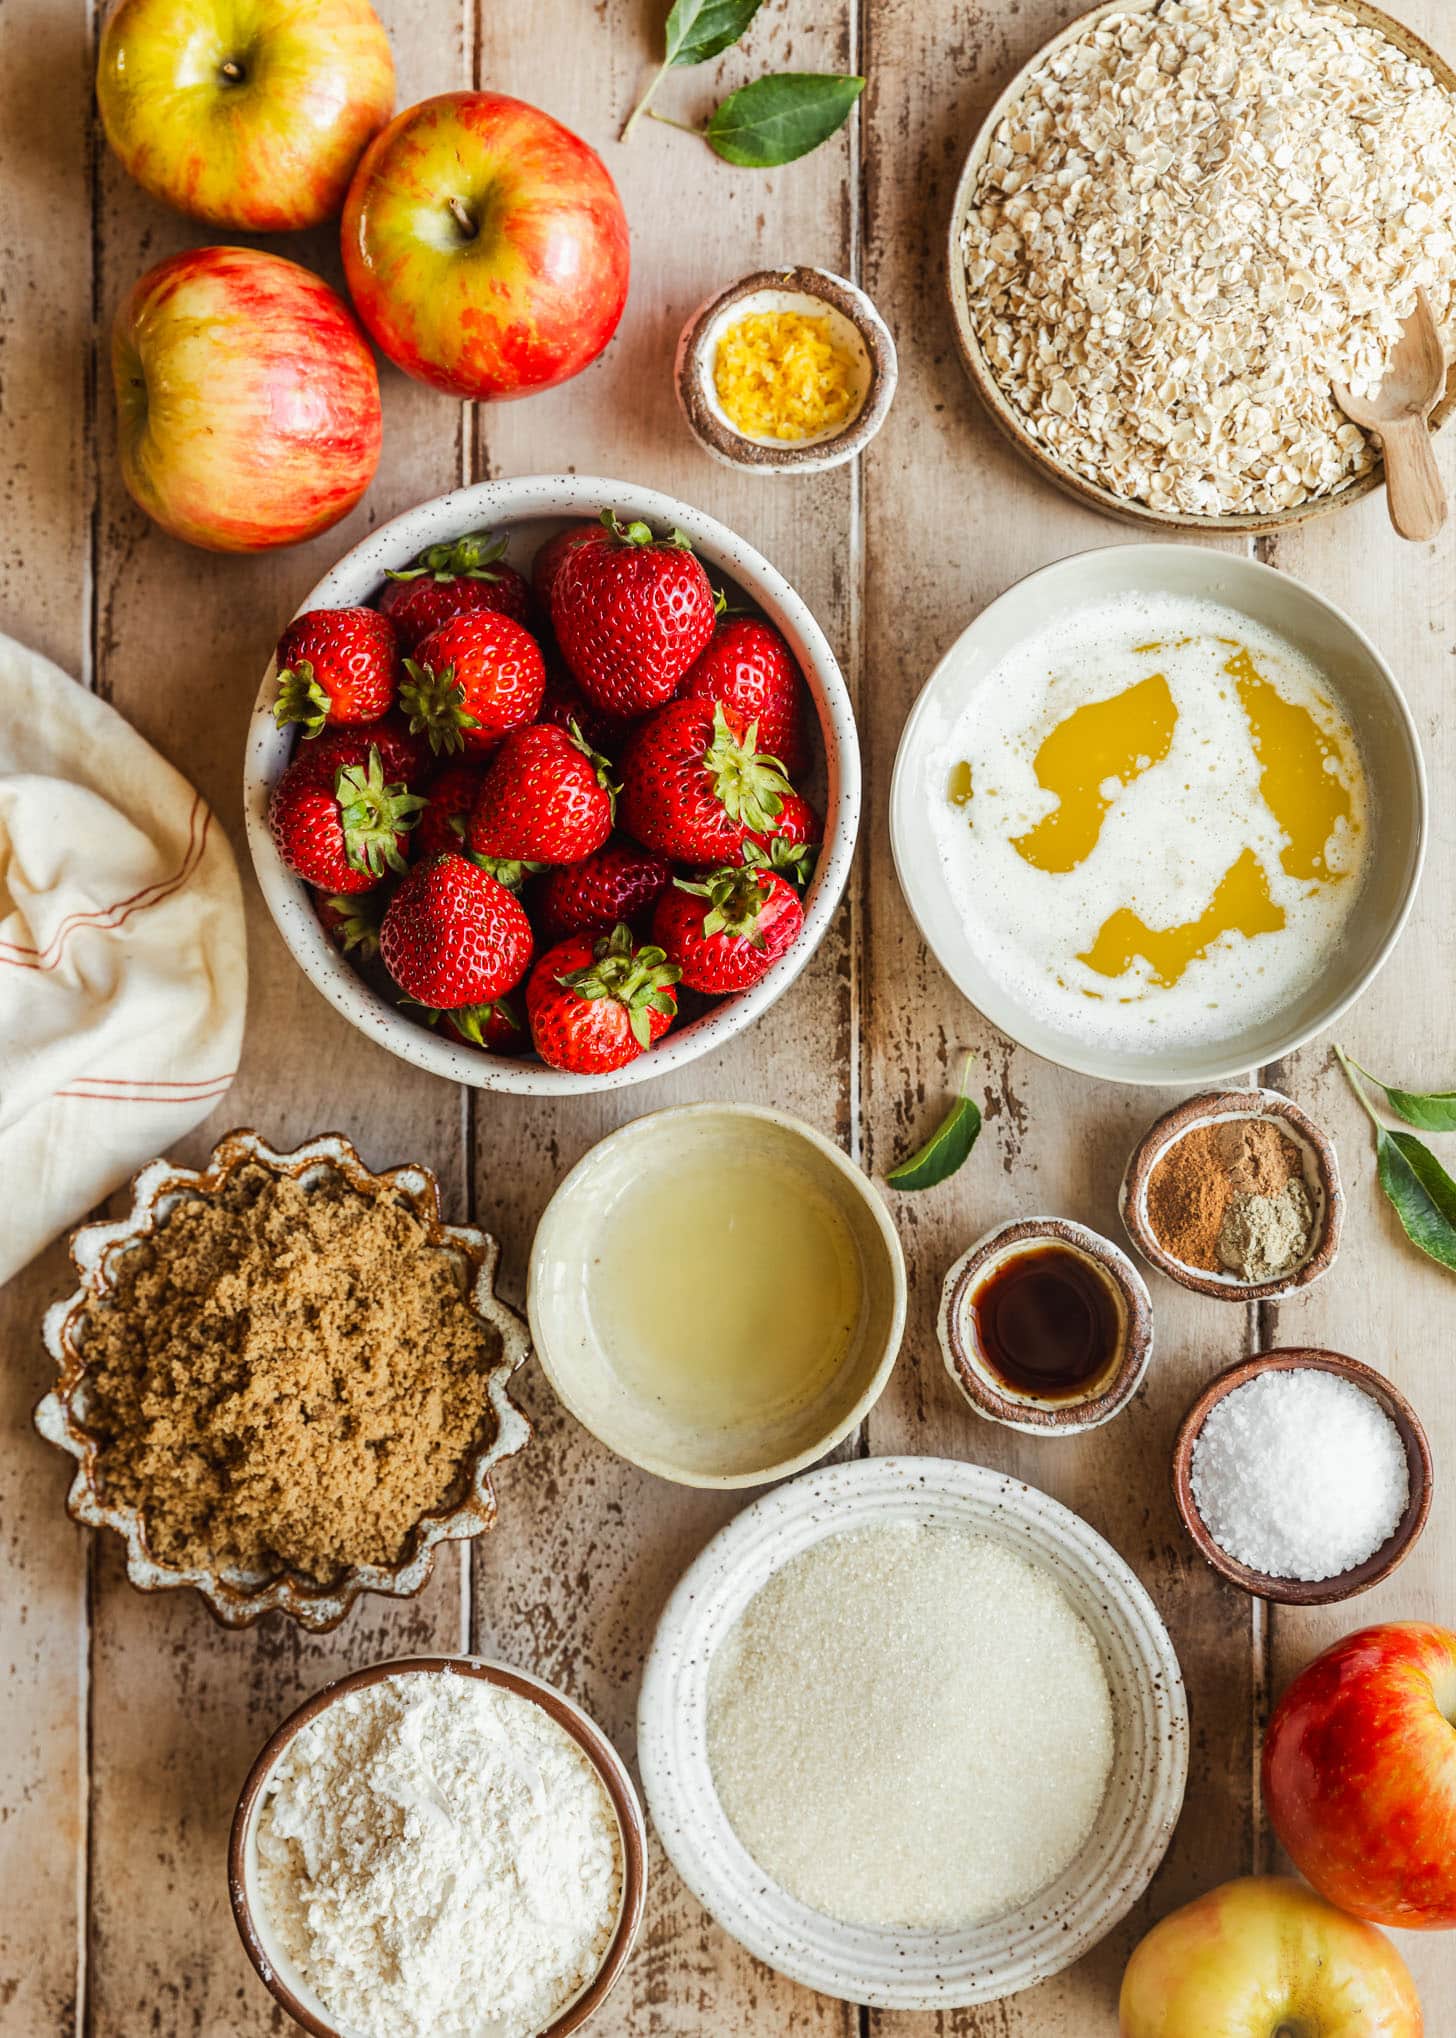 White and brown bowls of strawberries, sugar, brown sugar, lemon juice and zest, vanilla, spices, flour, and butter on a wood table.